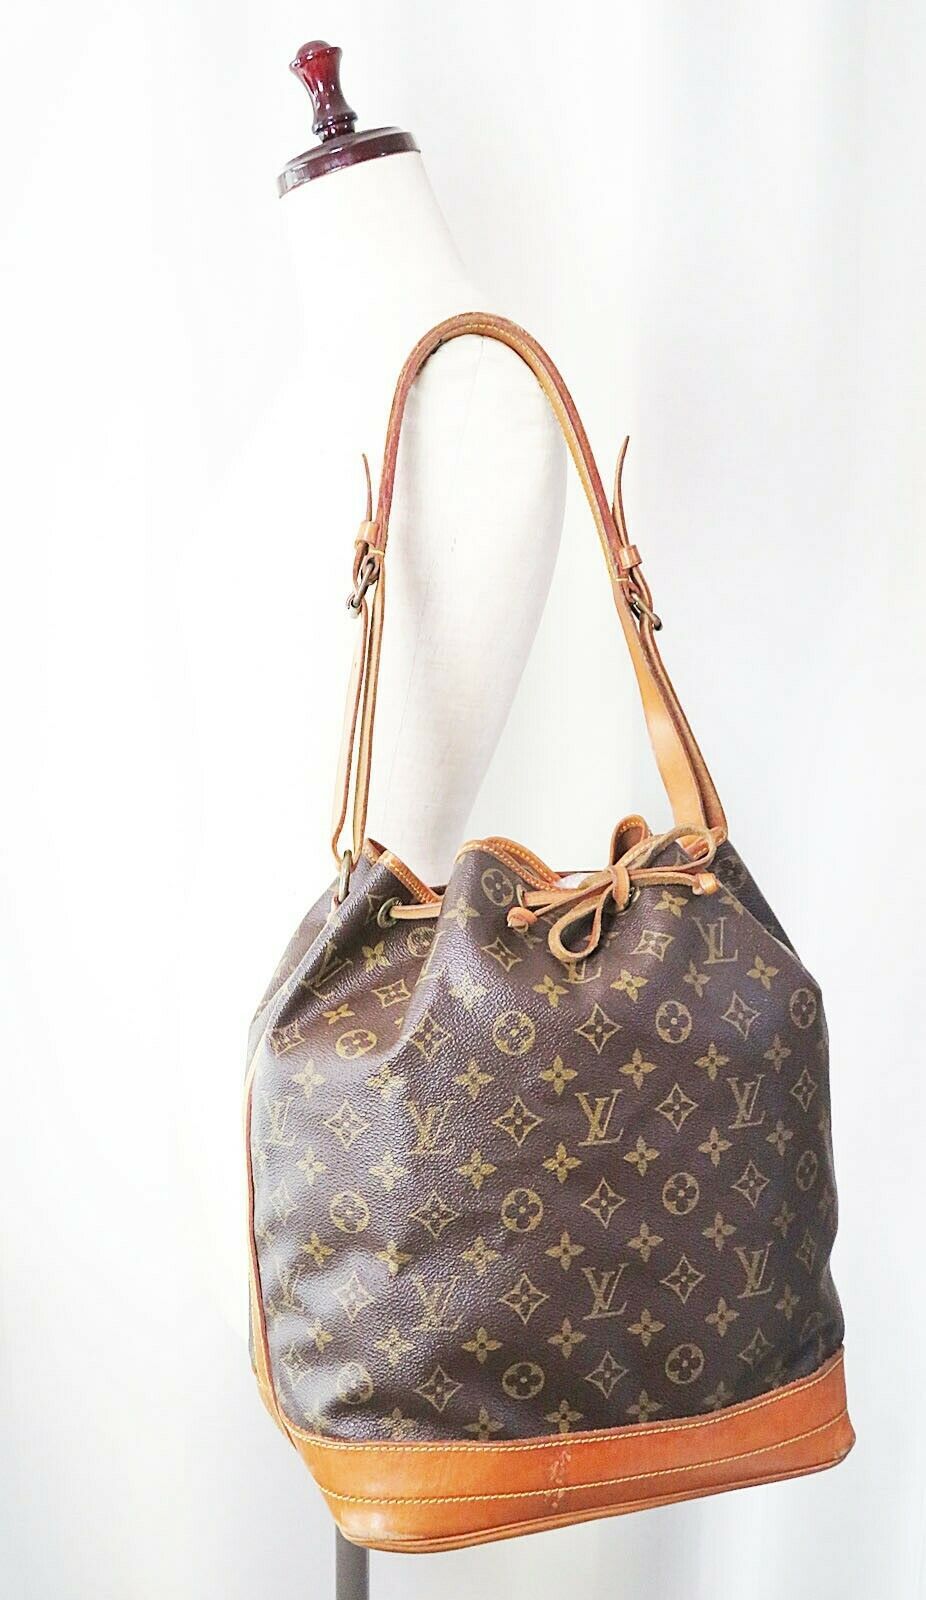 Louis Vuitton Tote Bag With Zipper - 40 For Sale on 1stDibs